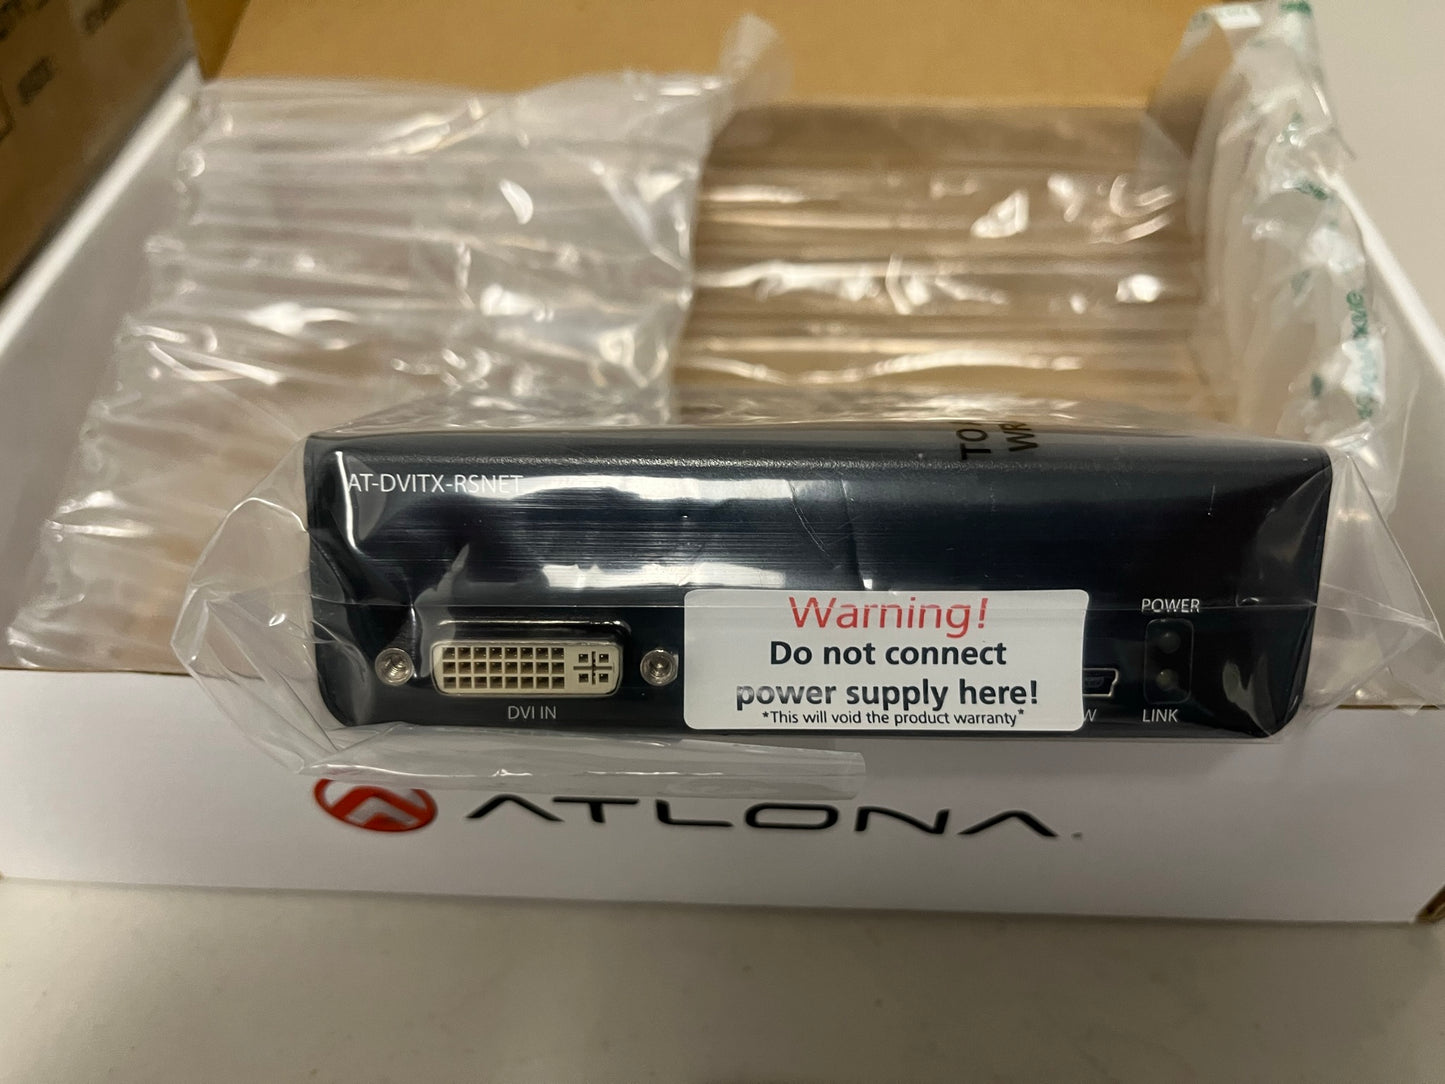 New Atlona AT-DVITX-RSNET, DVI Transmitter for Sale,  We Sell Professional Audio Equipment. Audio Systems, Amplifiers, Consoles, Mixers, Electronics, Entertainment, Sound, Live.